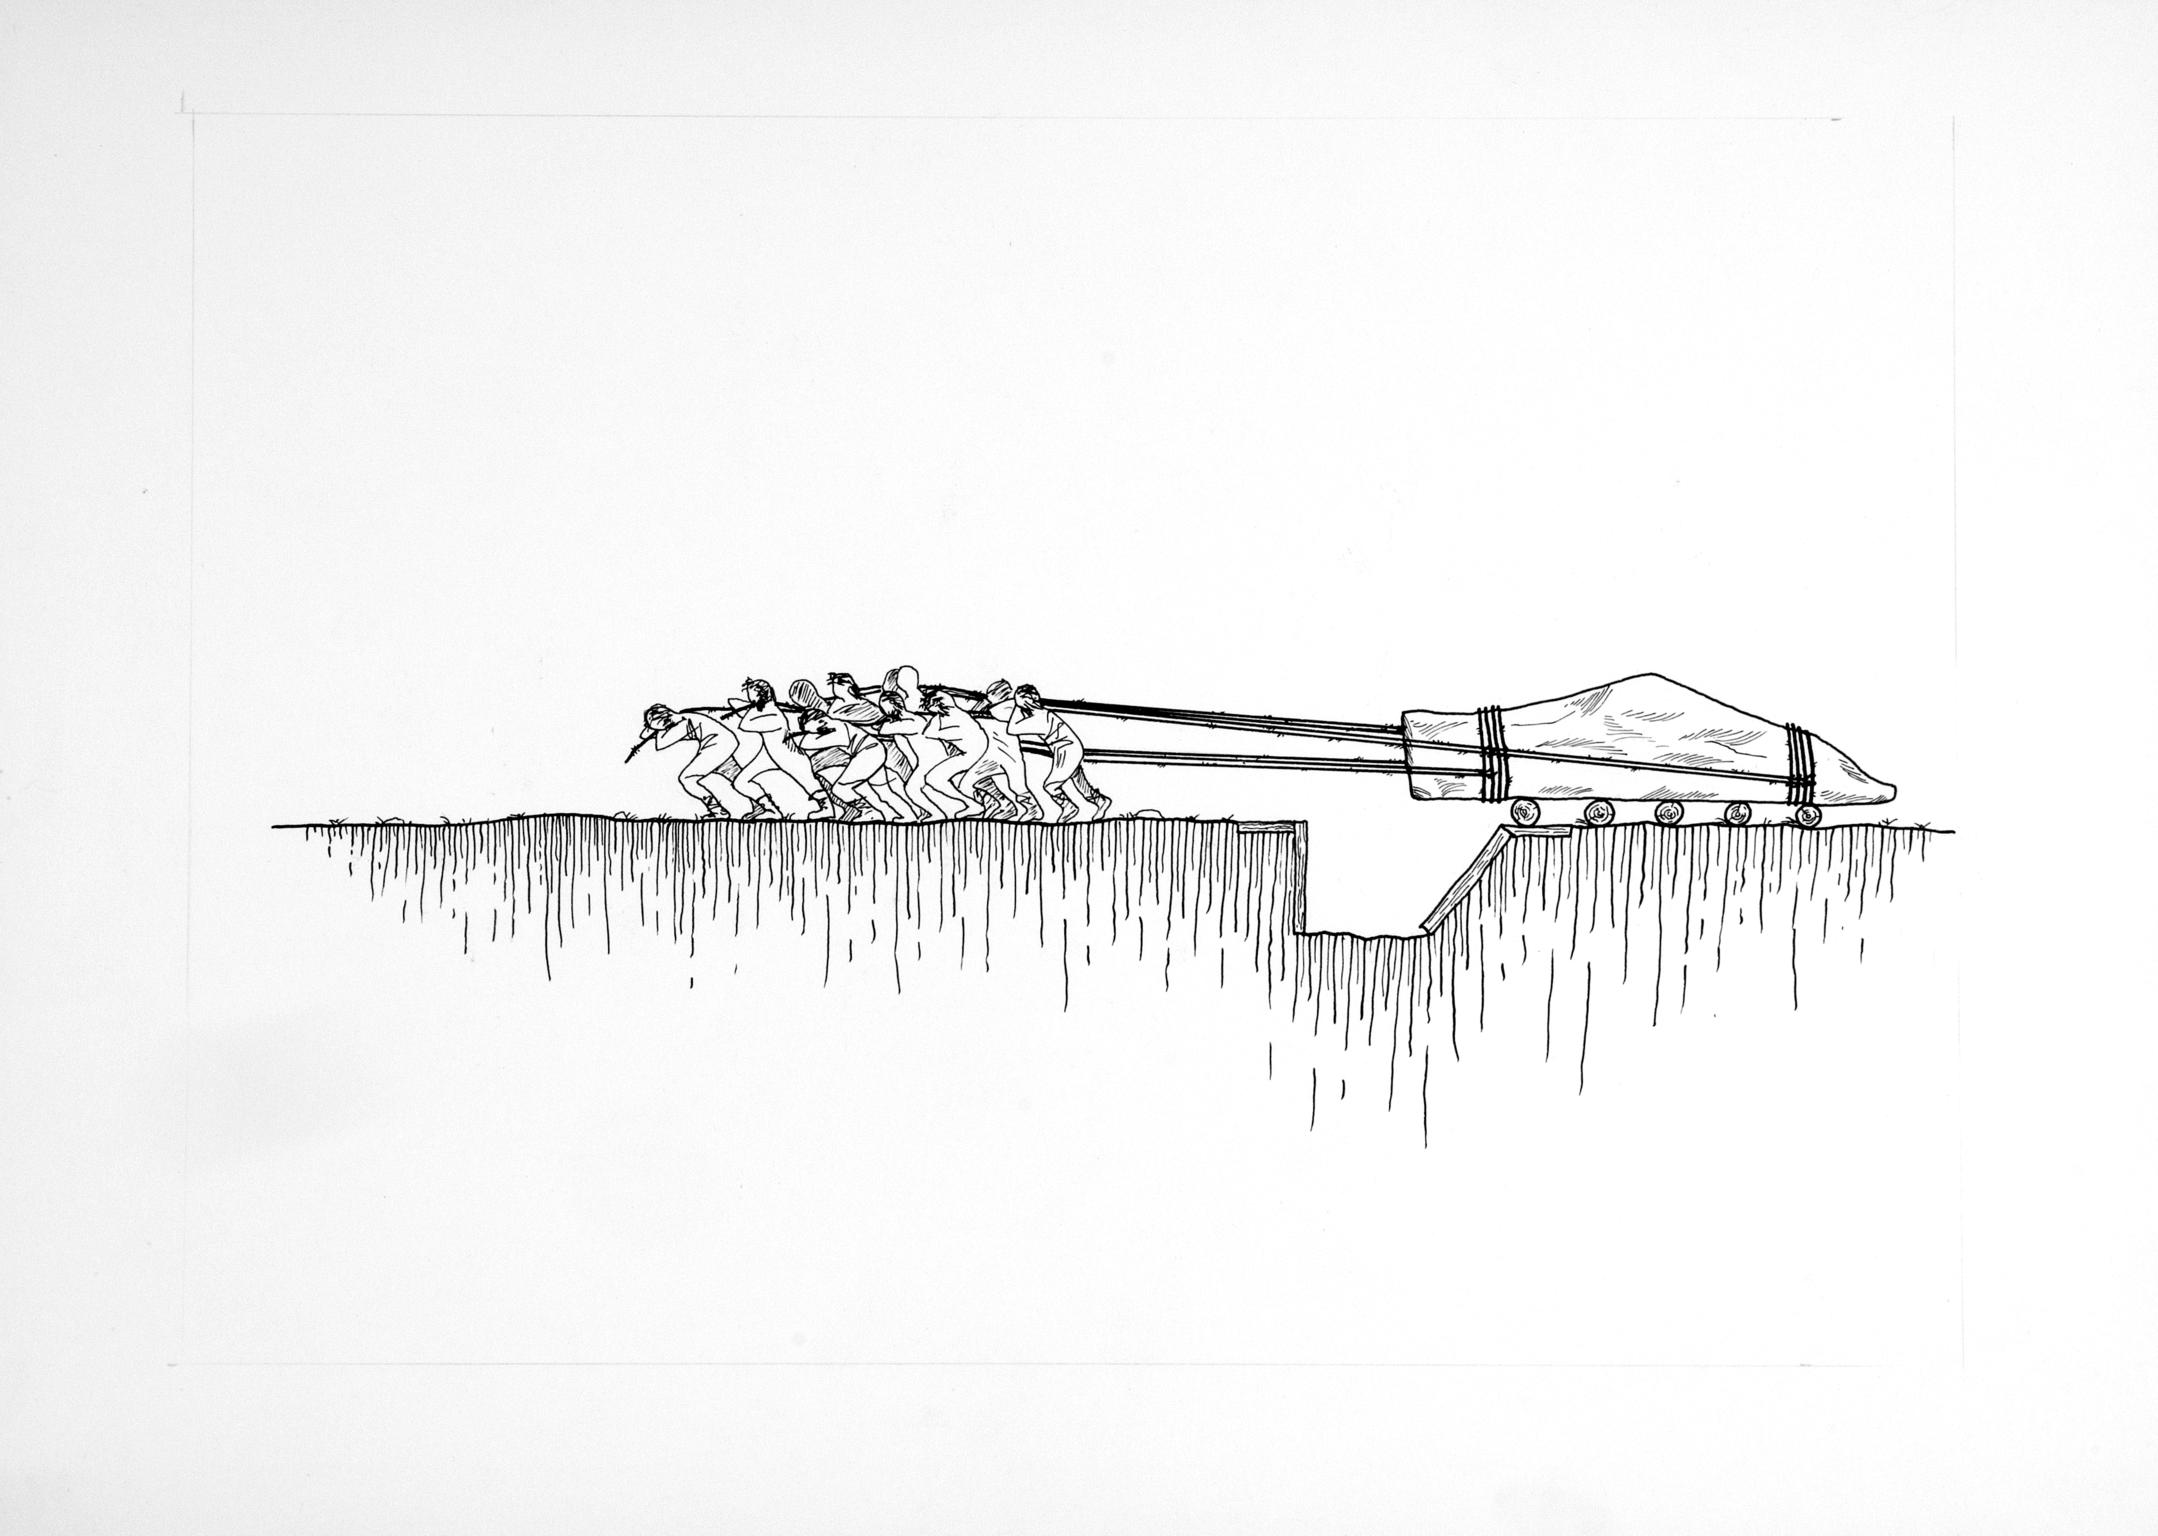 Construction of a Neolithic burial chamber, drawing